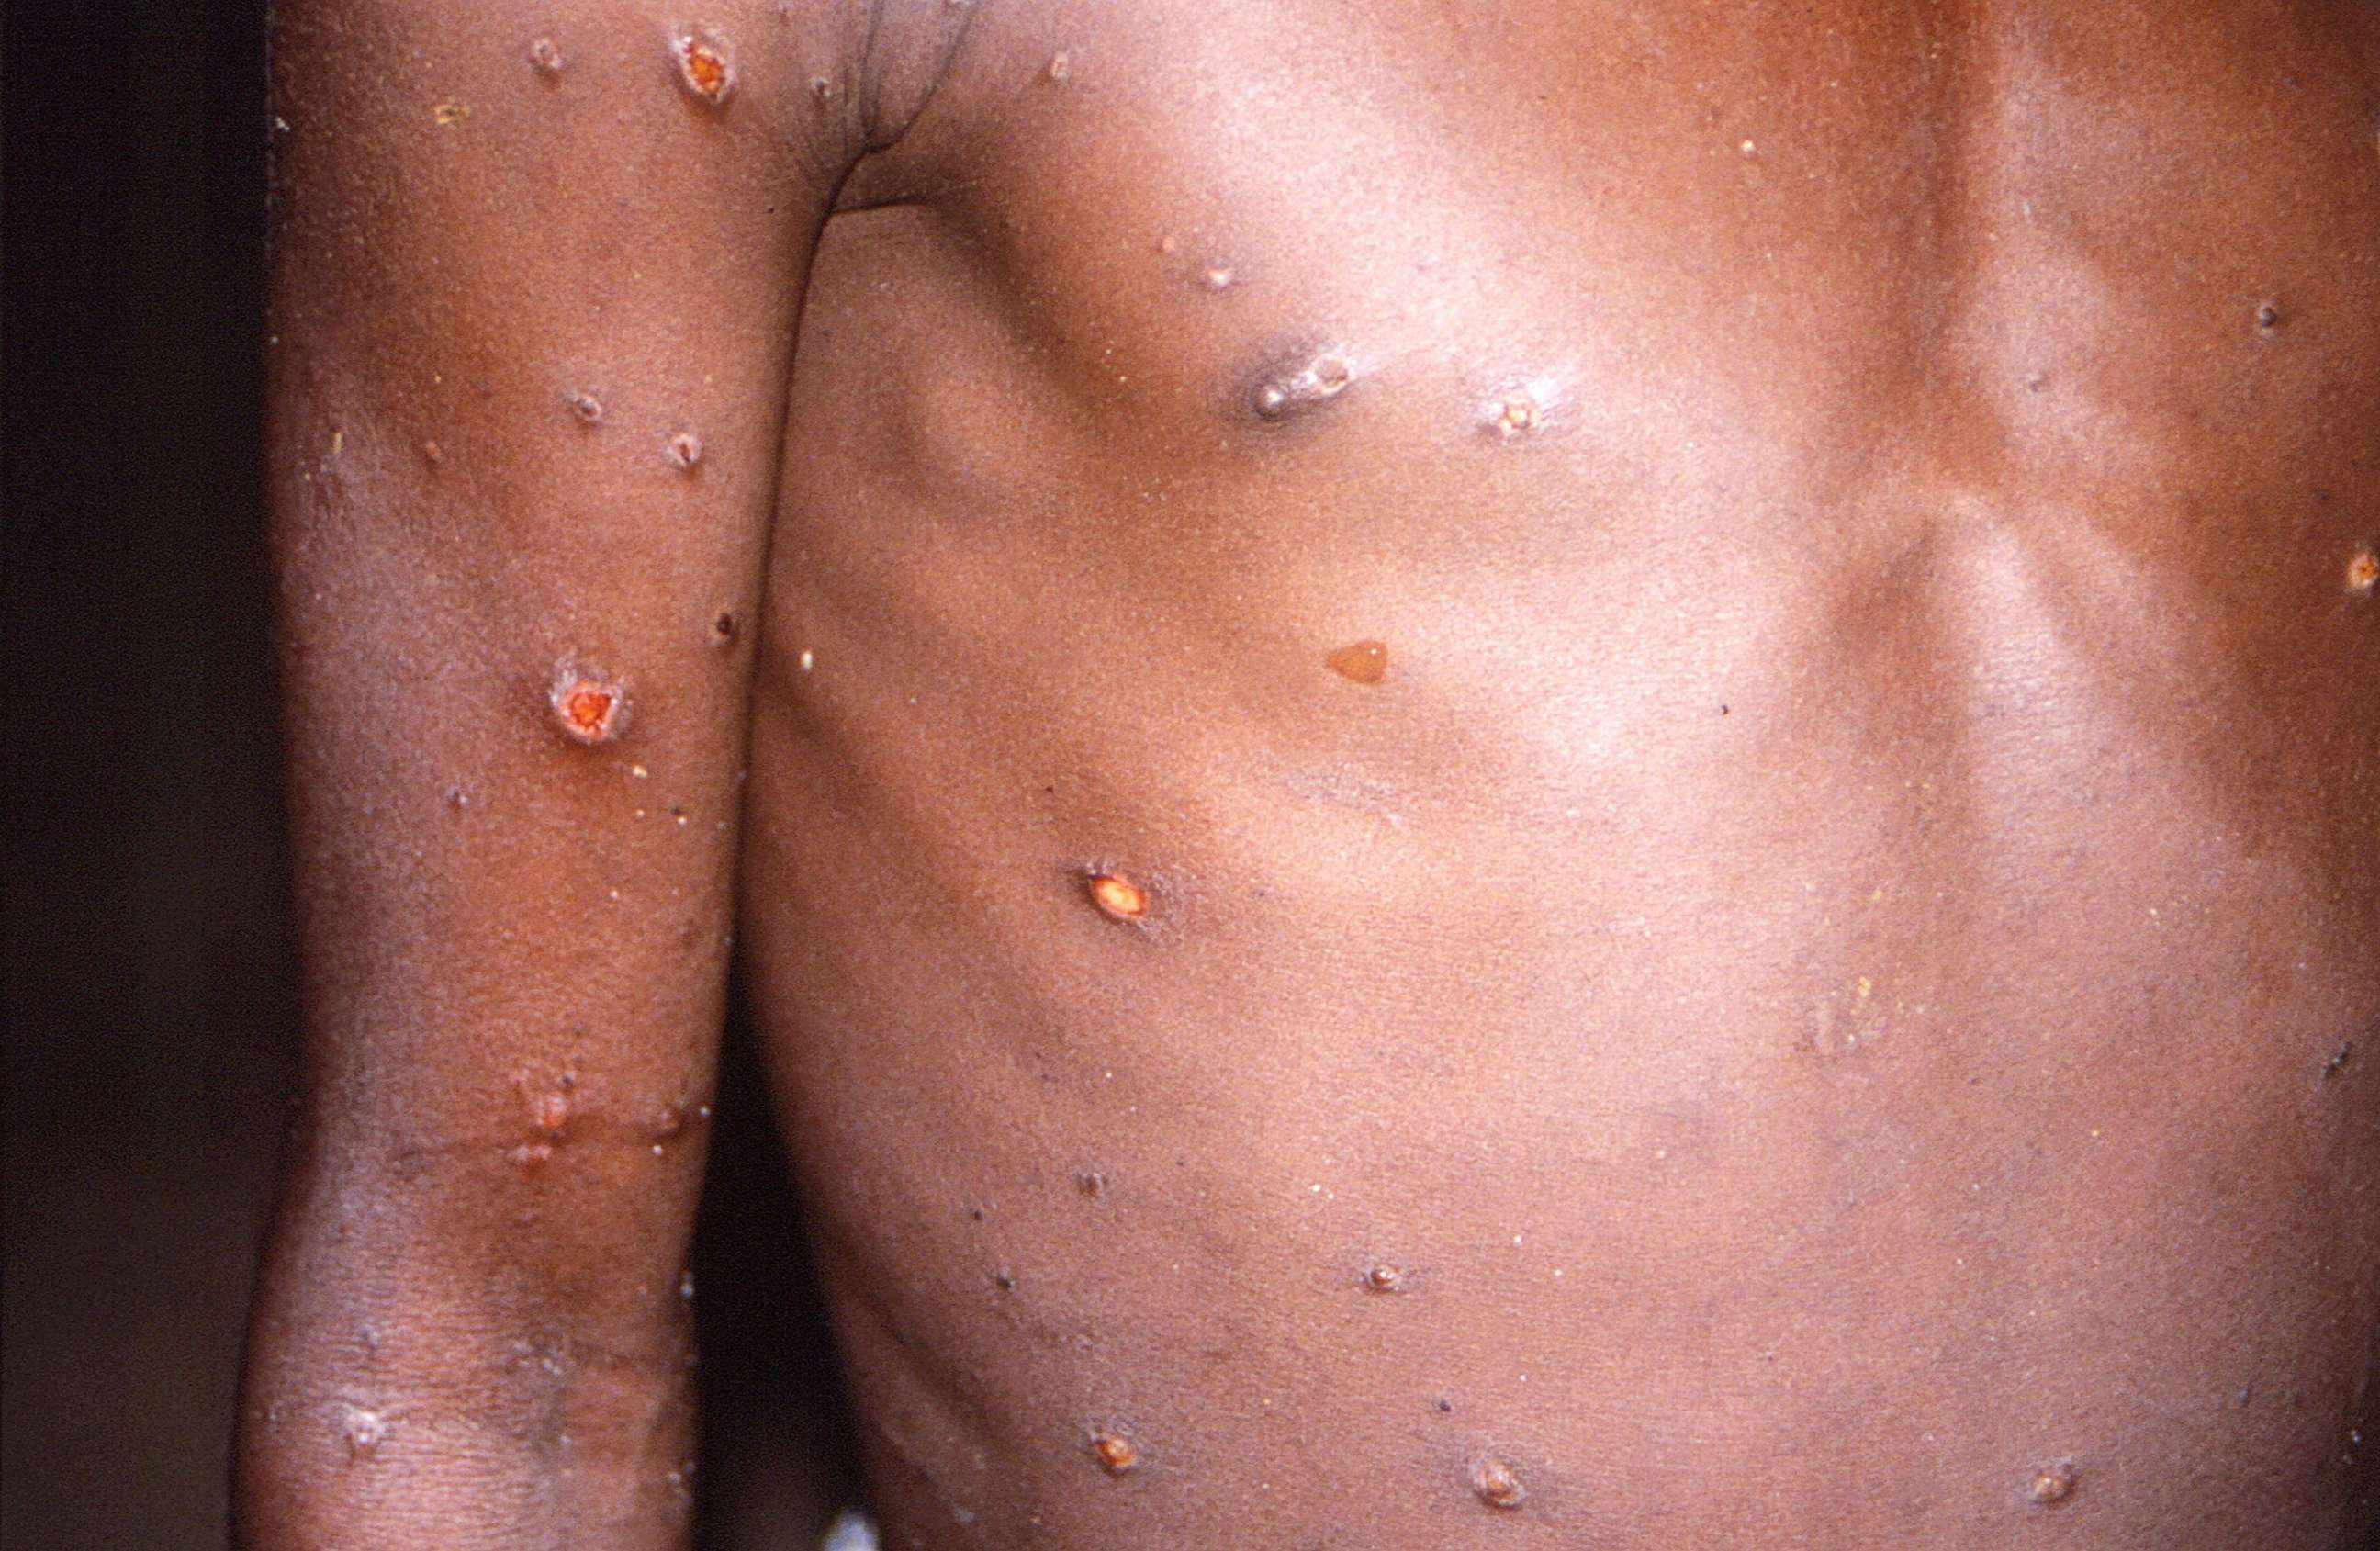 PHOTO: The arms and torso of a patient with skin lesions due to monkeypox, during an investigation into an outbreak in the Democratic Republic of the Congo in 1996-1997.